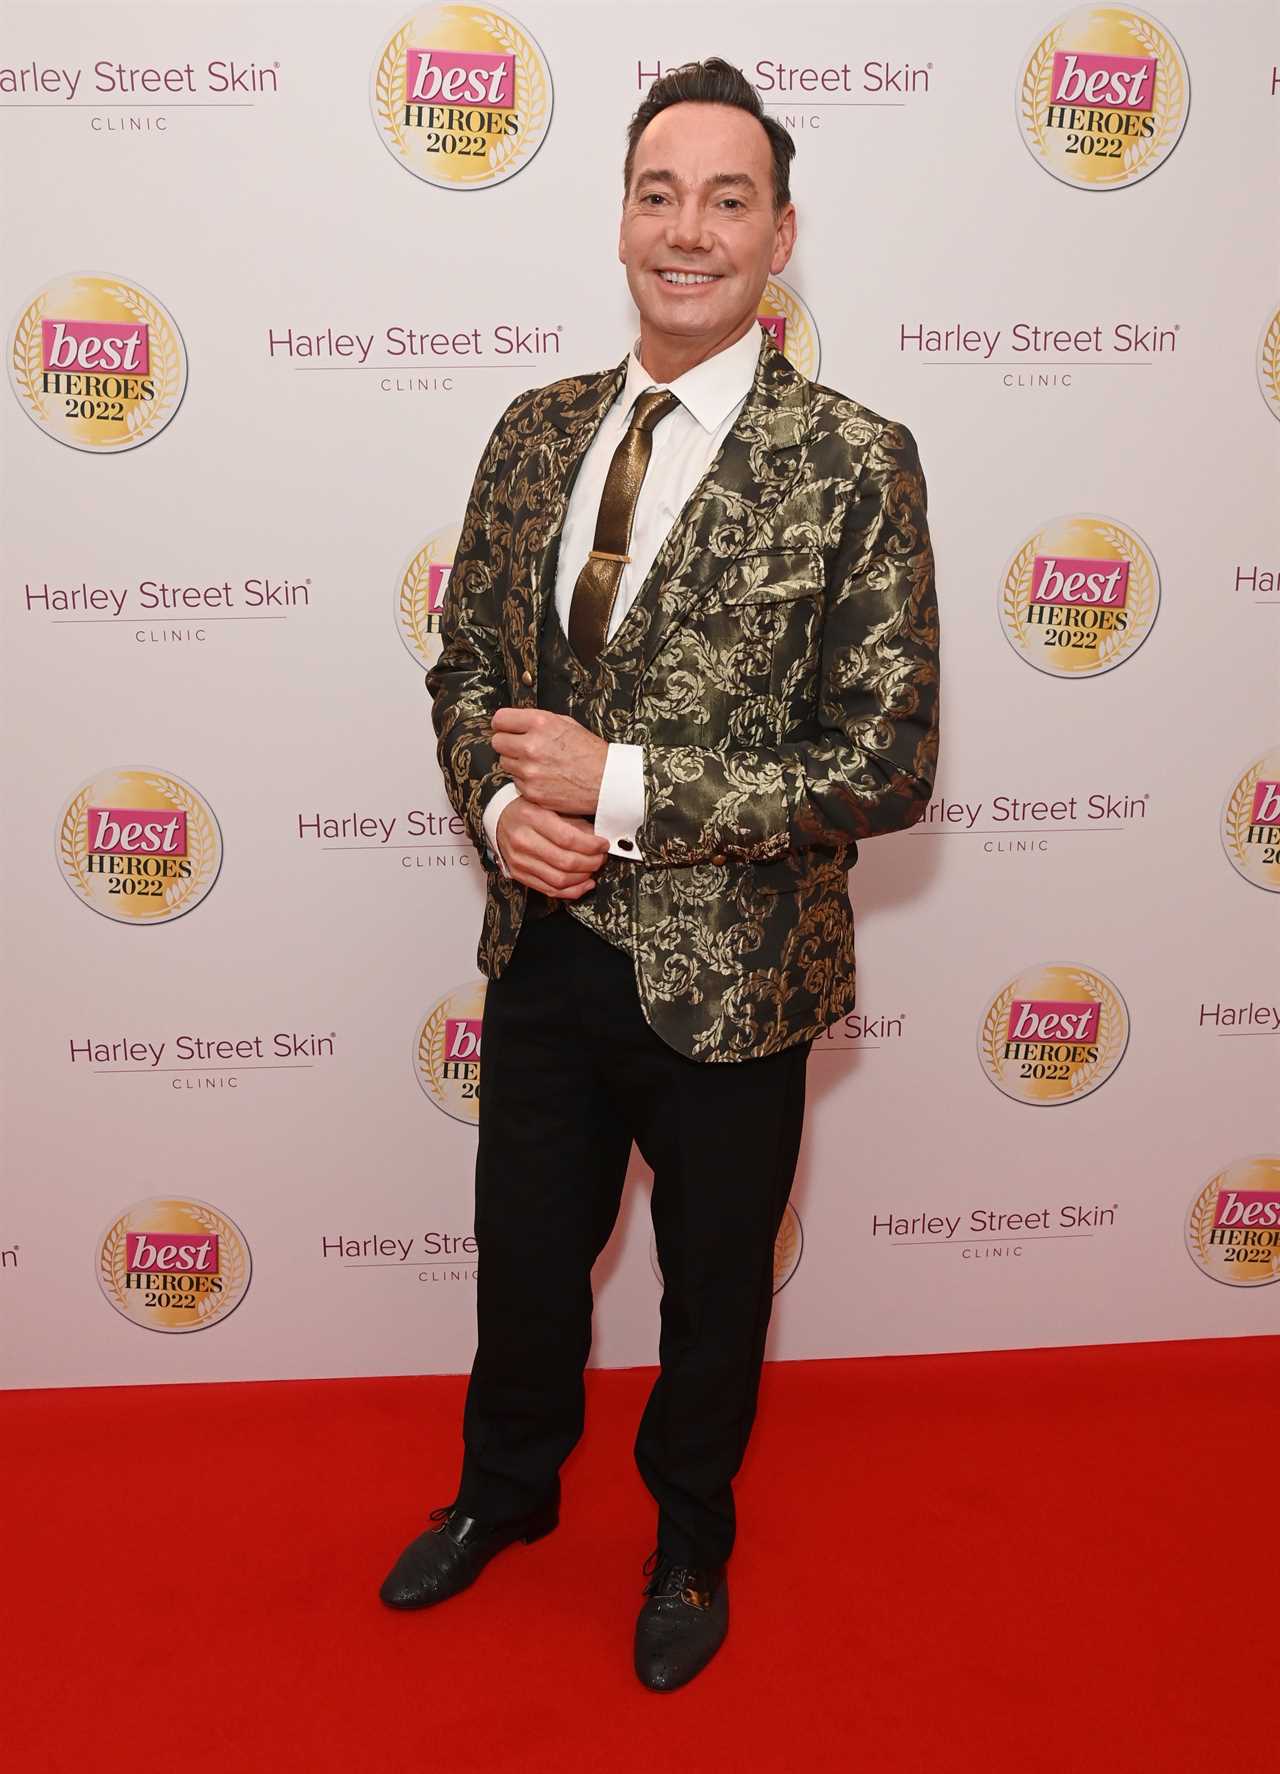 Craig Revel Horwood hits out at Strictly leaker and says ‘get a life’ for ‘ruining’ results shows